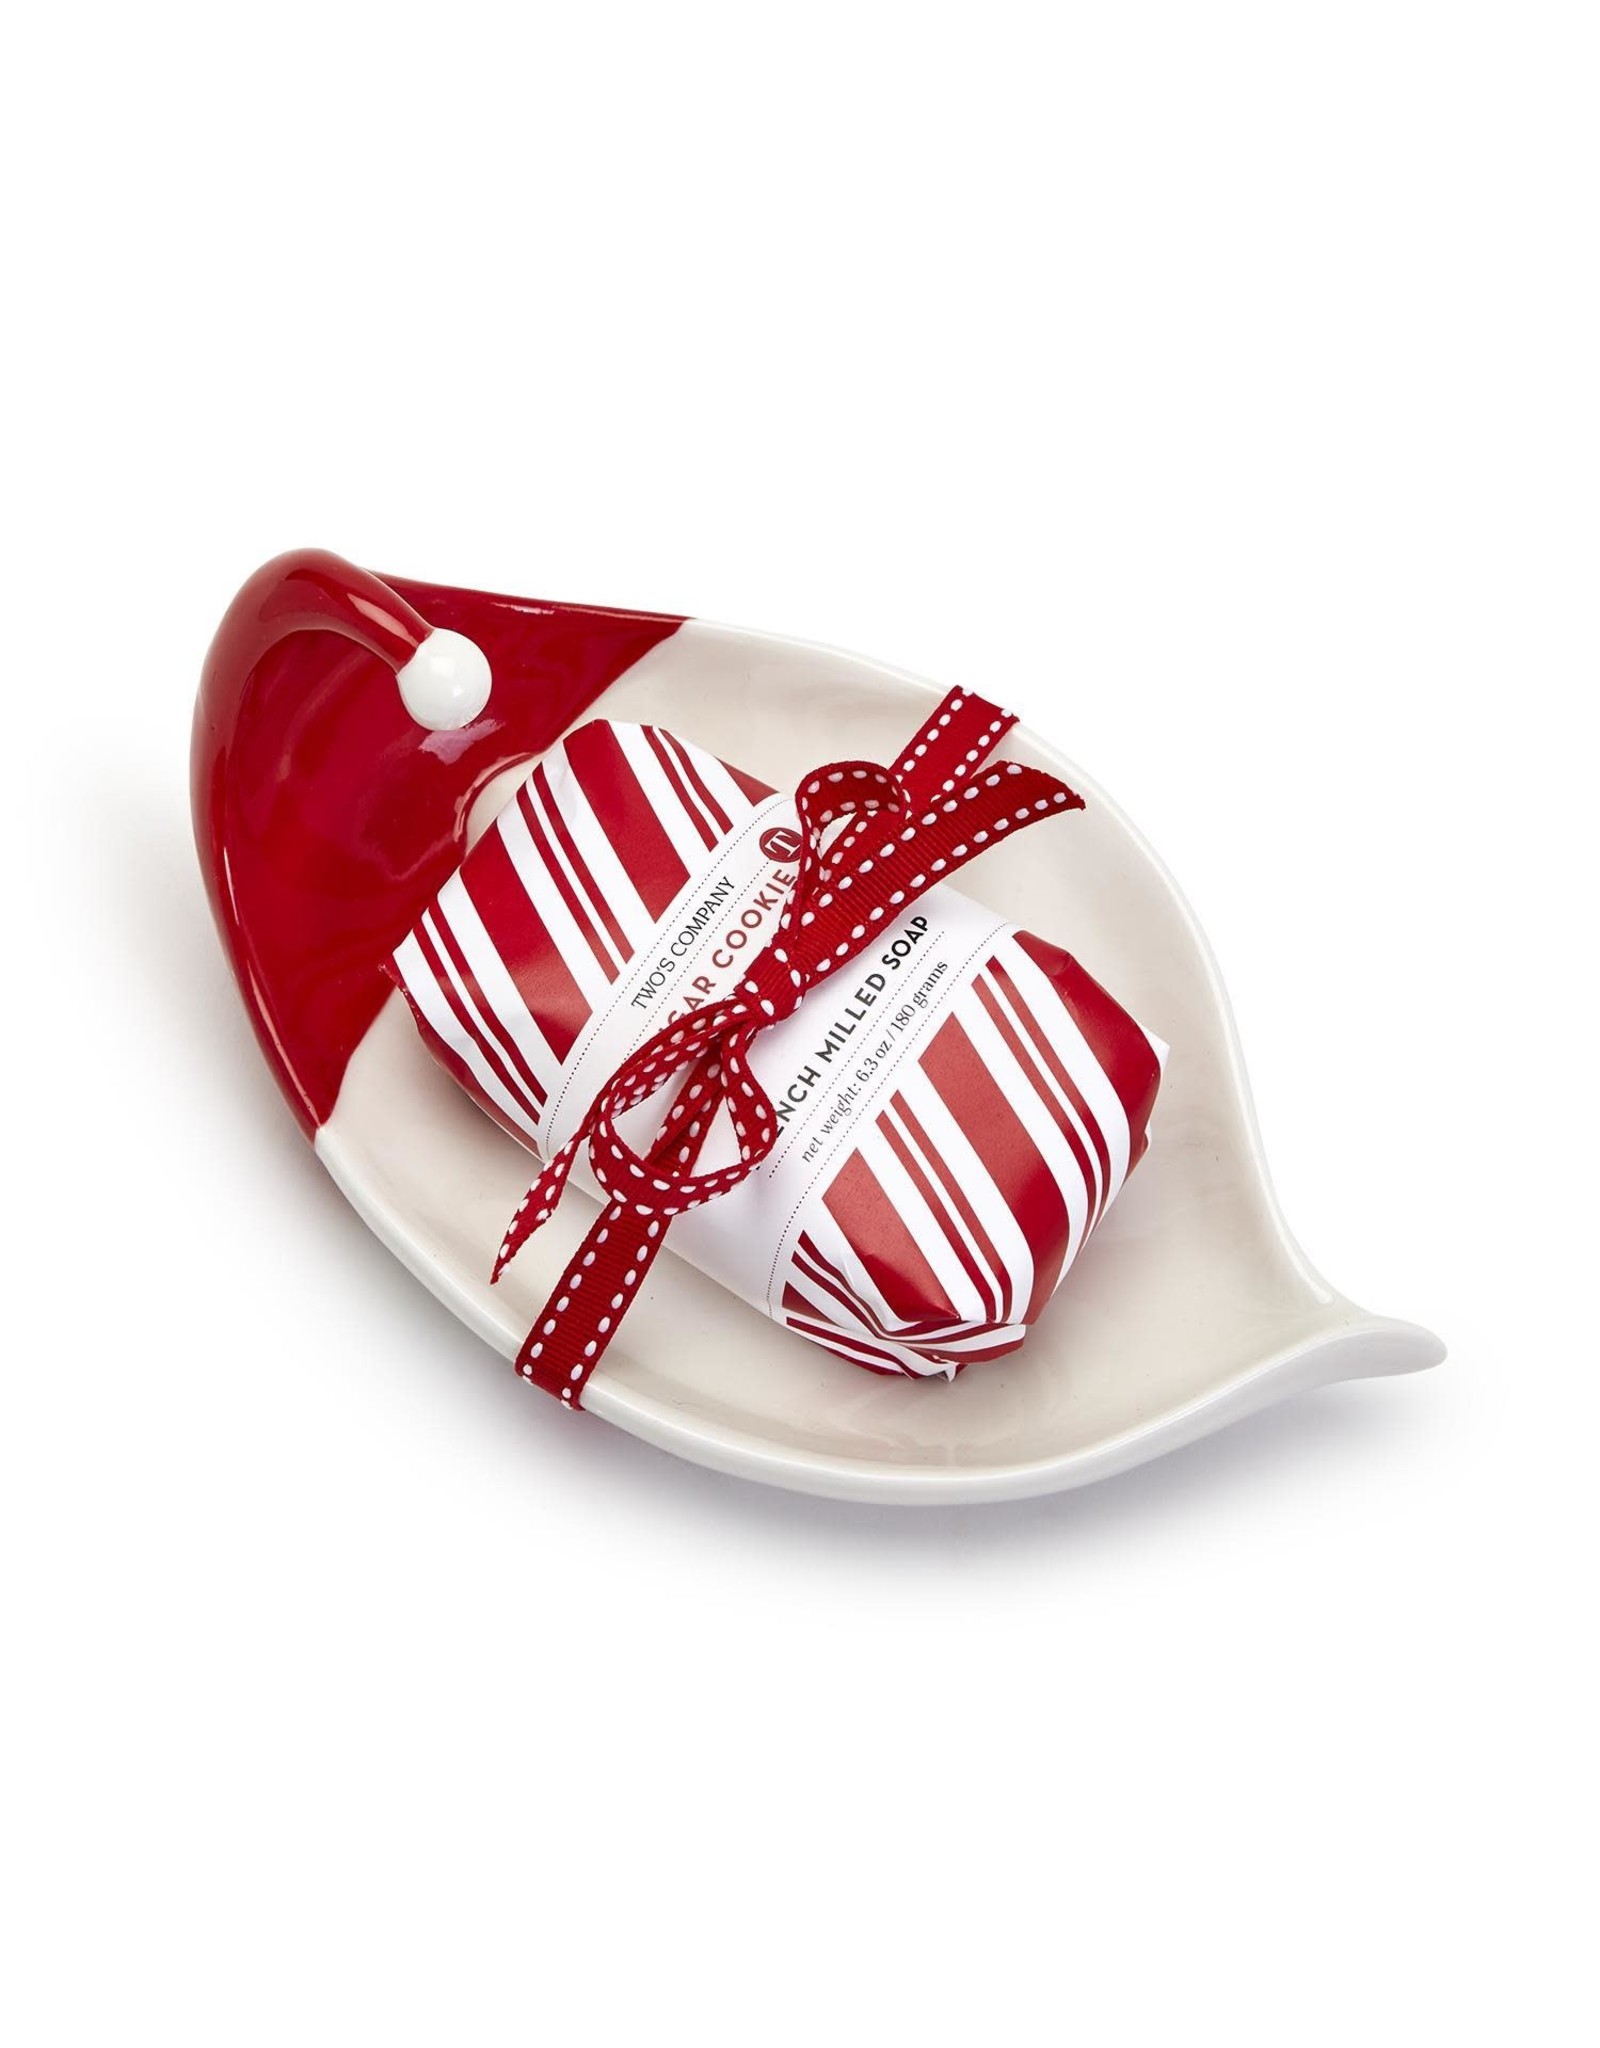 Two's Company Inc. Santa Tray with Sugar Cookie Scented Soap